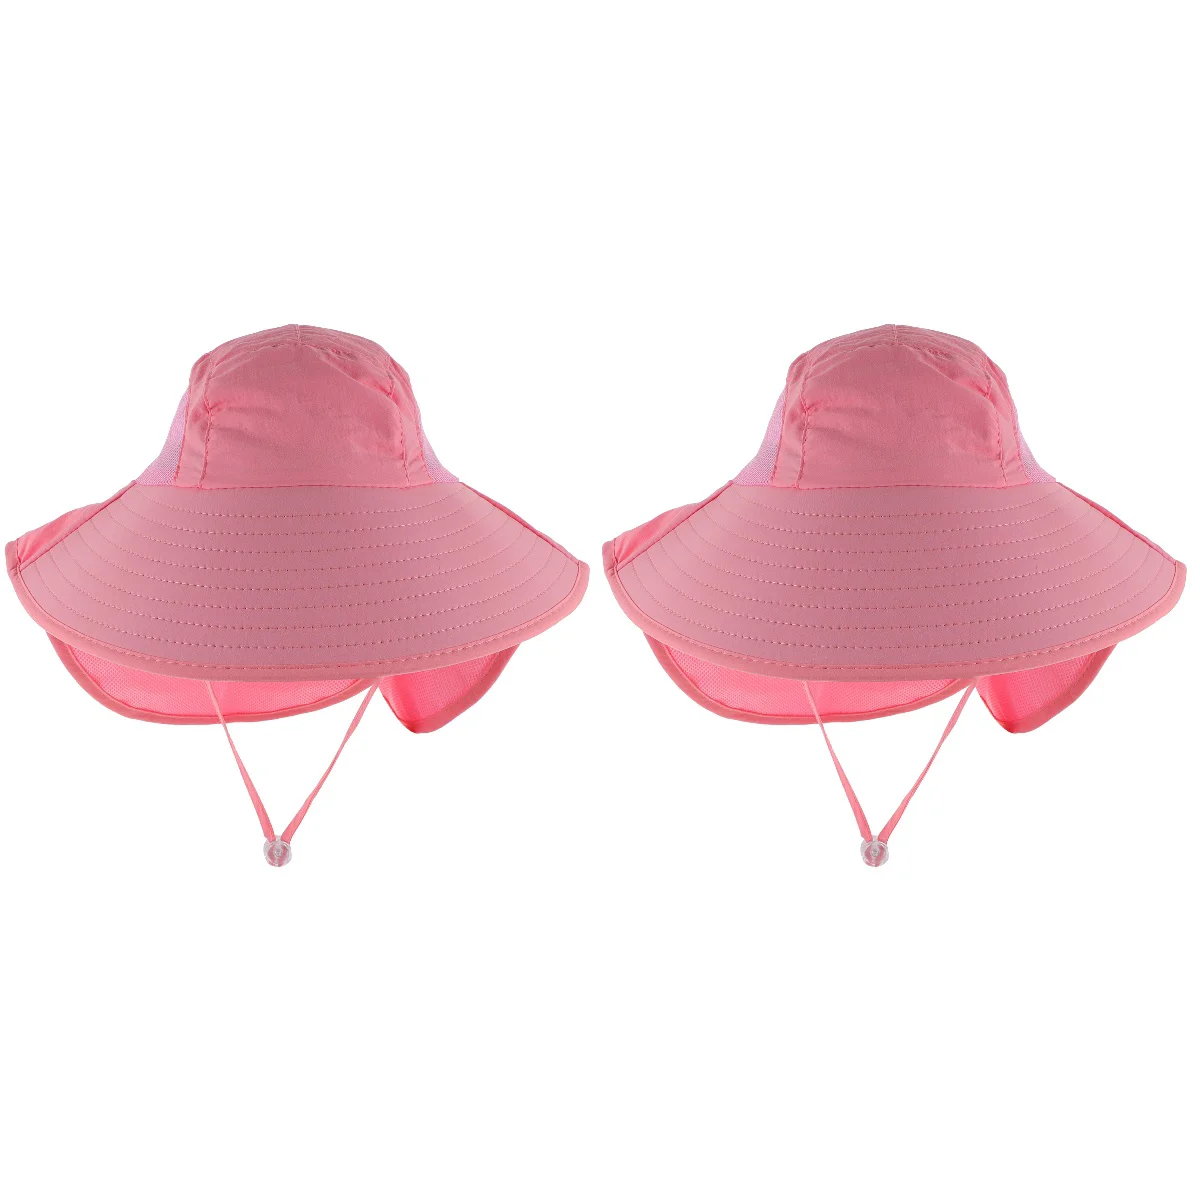 

Breathable Bucket Hat Sun Protection Fisherman Kids Outdoor Wide Brim Fishing Chin Strap